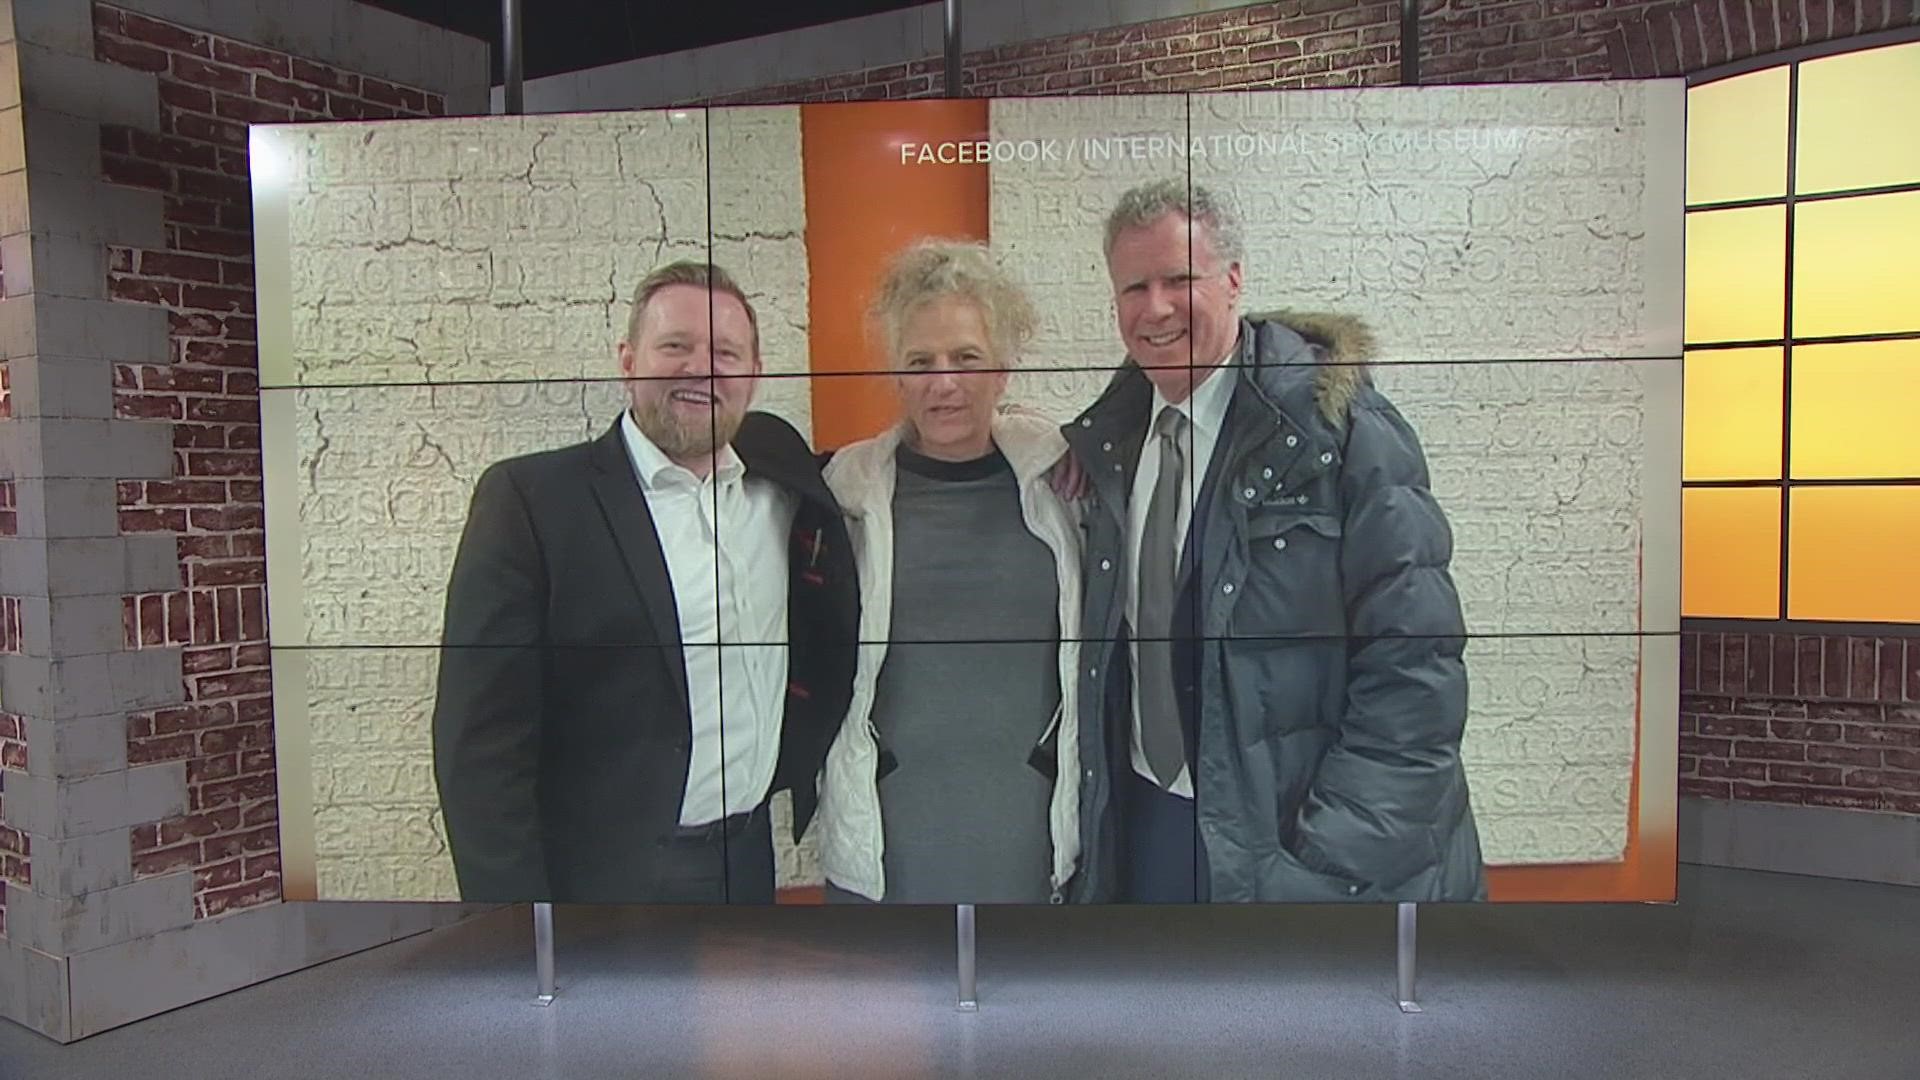 Comedian Will Ferrell showed up at the "International Spy Museum" in Southwest DC Sunday.